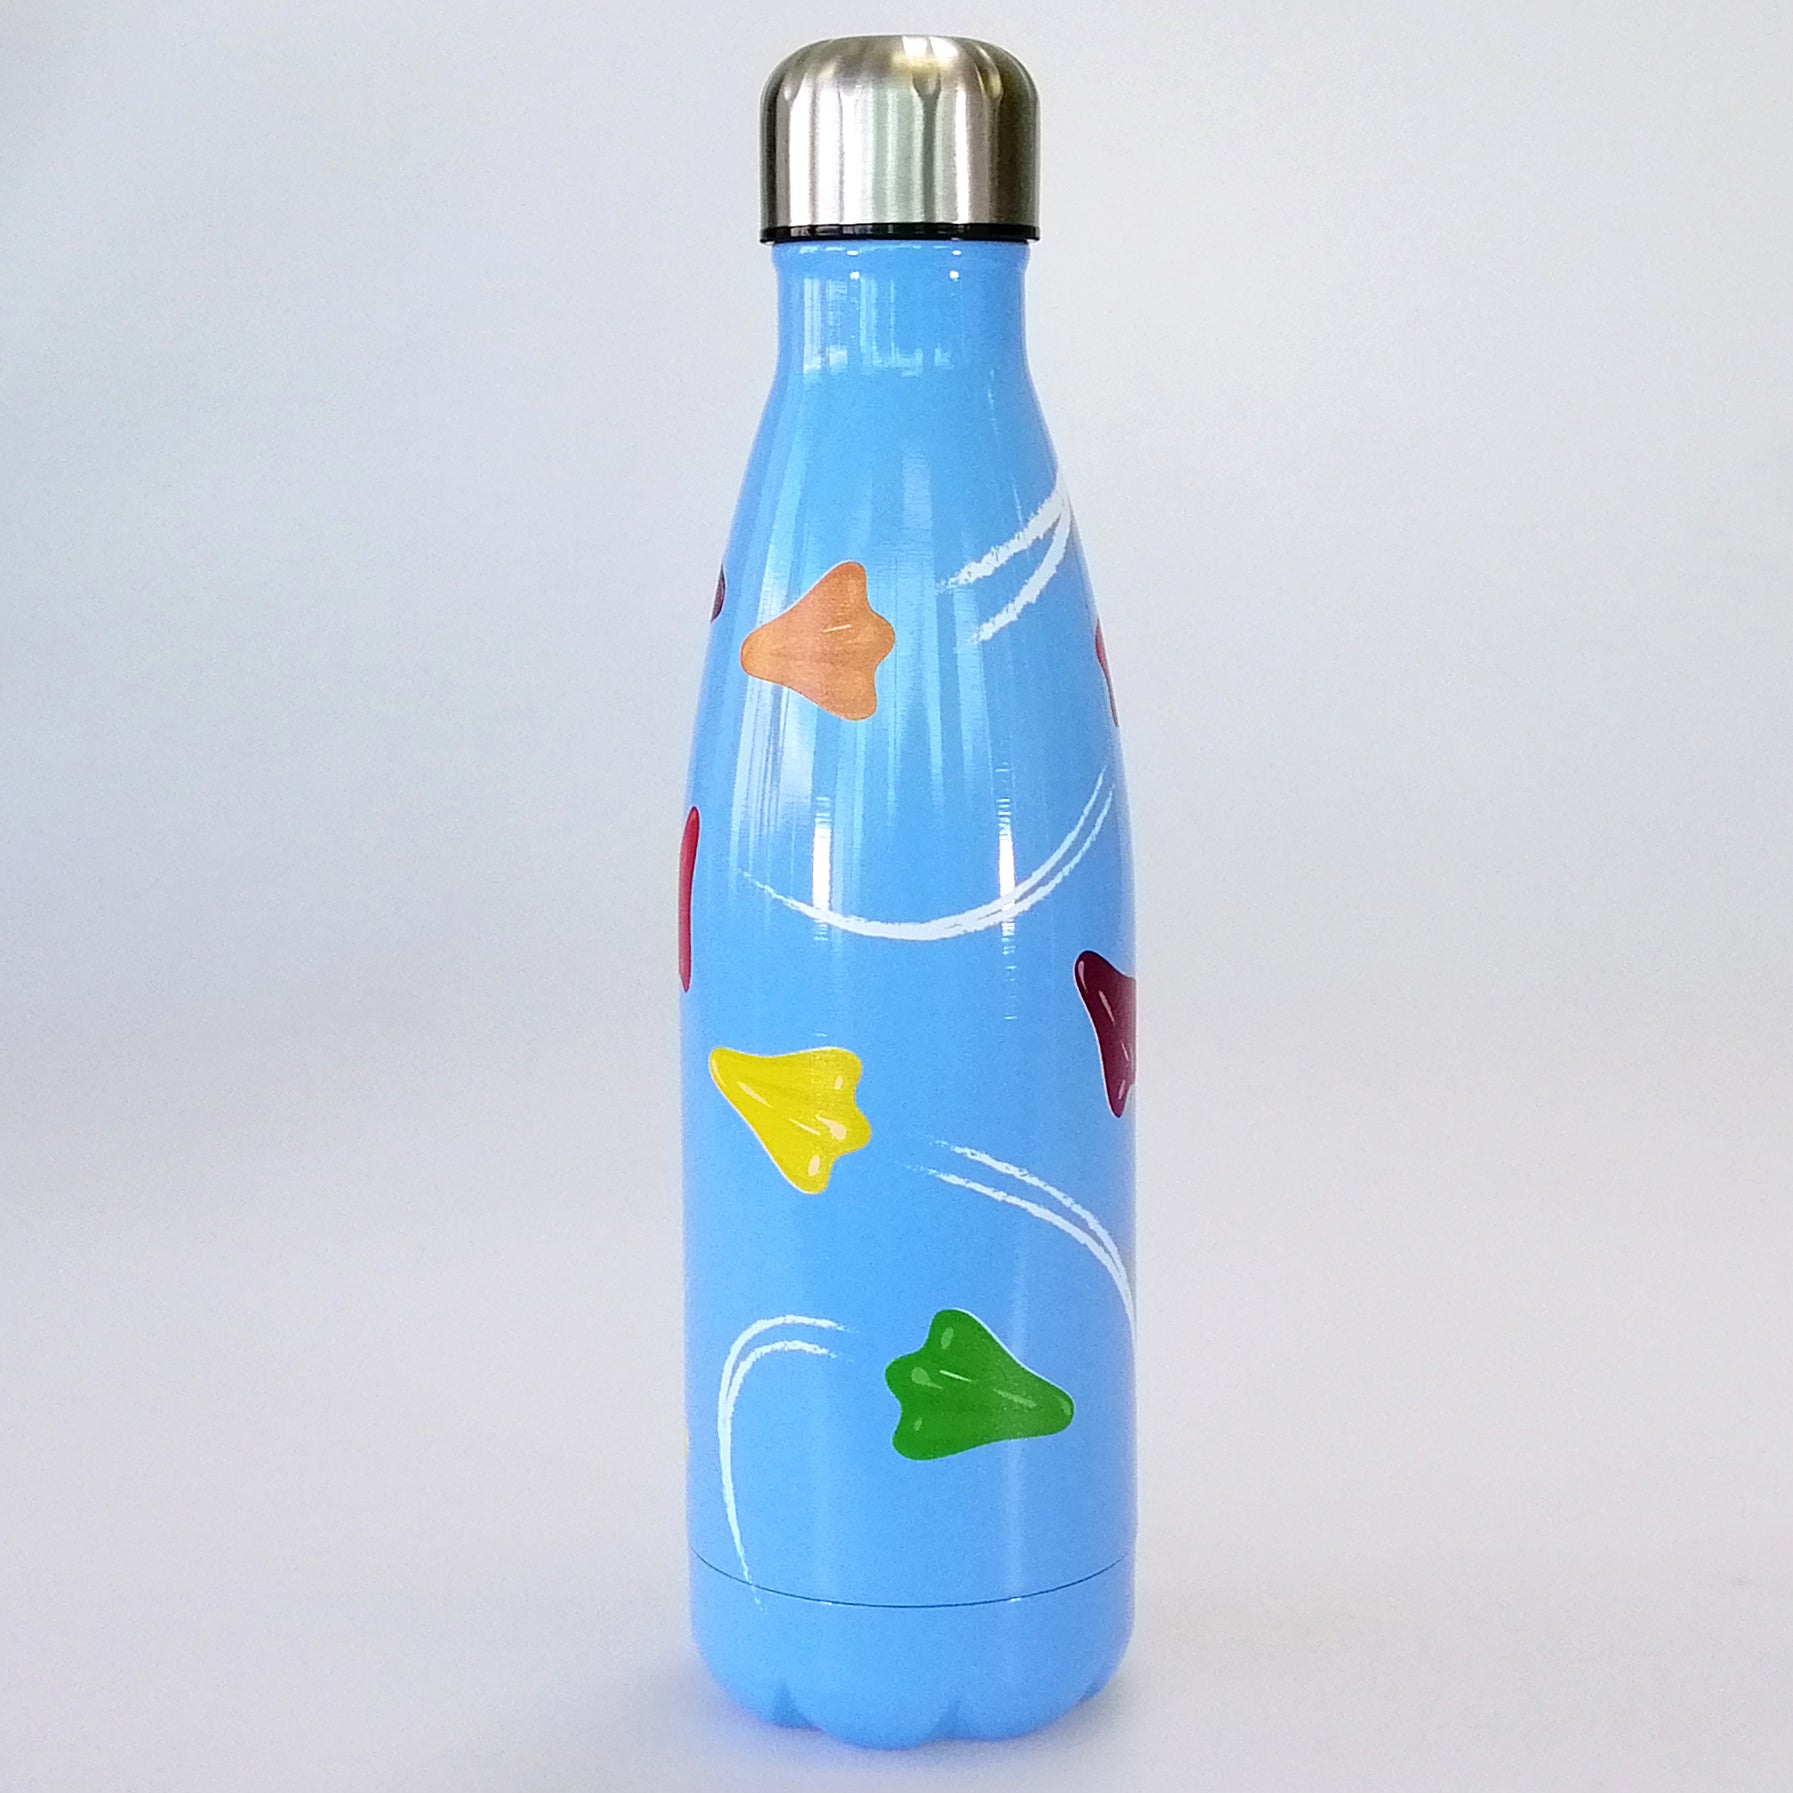 Double Walled Stainless Steel Bottle - Jet Planes 500ml